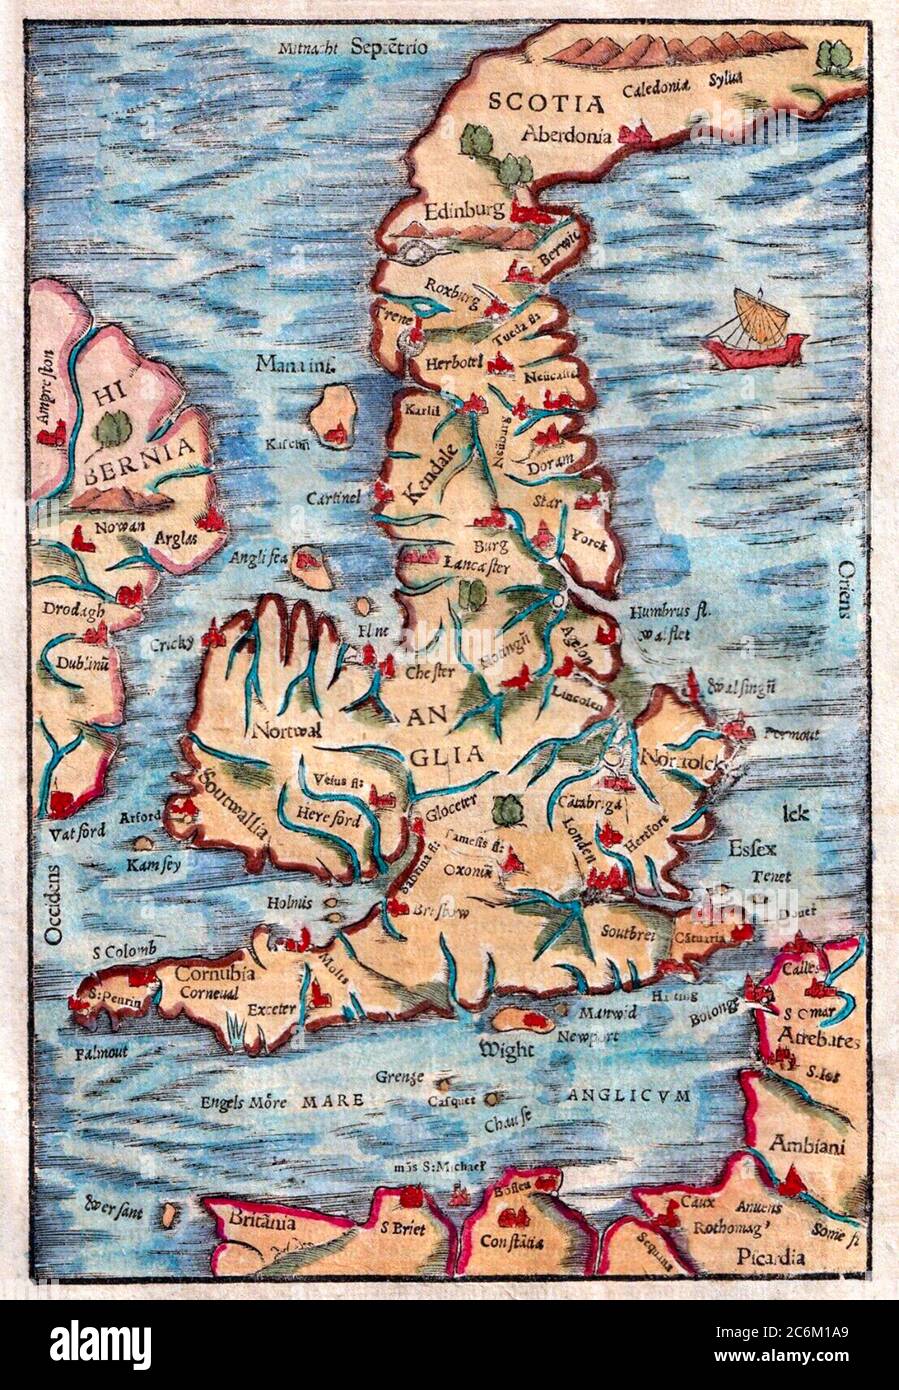 1588 , GREAT BRITAIN  : The View Great Britain plant from the 1588 edition of COSMOGRAPHIA ( 1544 ) by   german cartographer and cosmographer  Sebastian  Münster ( 1488 – 1552 ). One of the earliest German description of the world . -  GRAND BRETAGNA  - VIEW  - FOTO STORICHE - HISTORY - GEOGRAFIA - GEOGRAPHY  - COSMOGRAFIA - COSMOGONIA - CARTOGRAFIA - Cartina CARTA GEOGRAFICA -  sea - mare - Mar della MANICA - English Channel  - Muenster - Munster ---  Archivio GBB Stock Photo